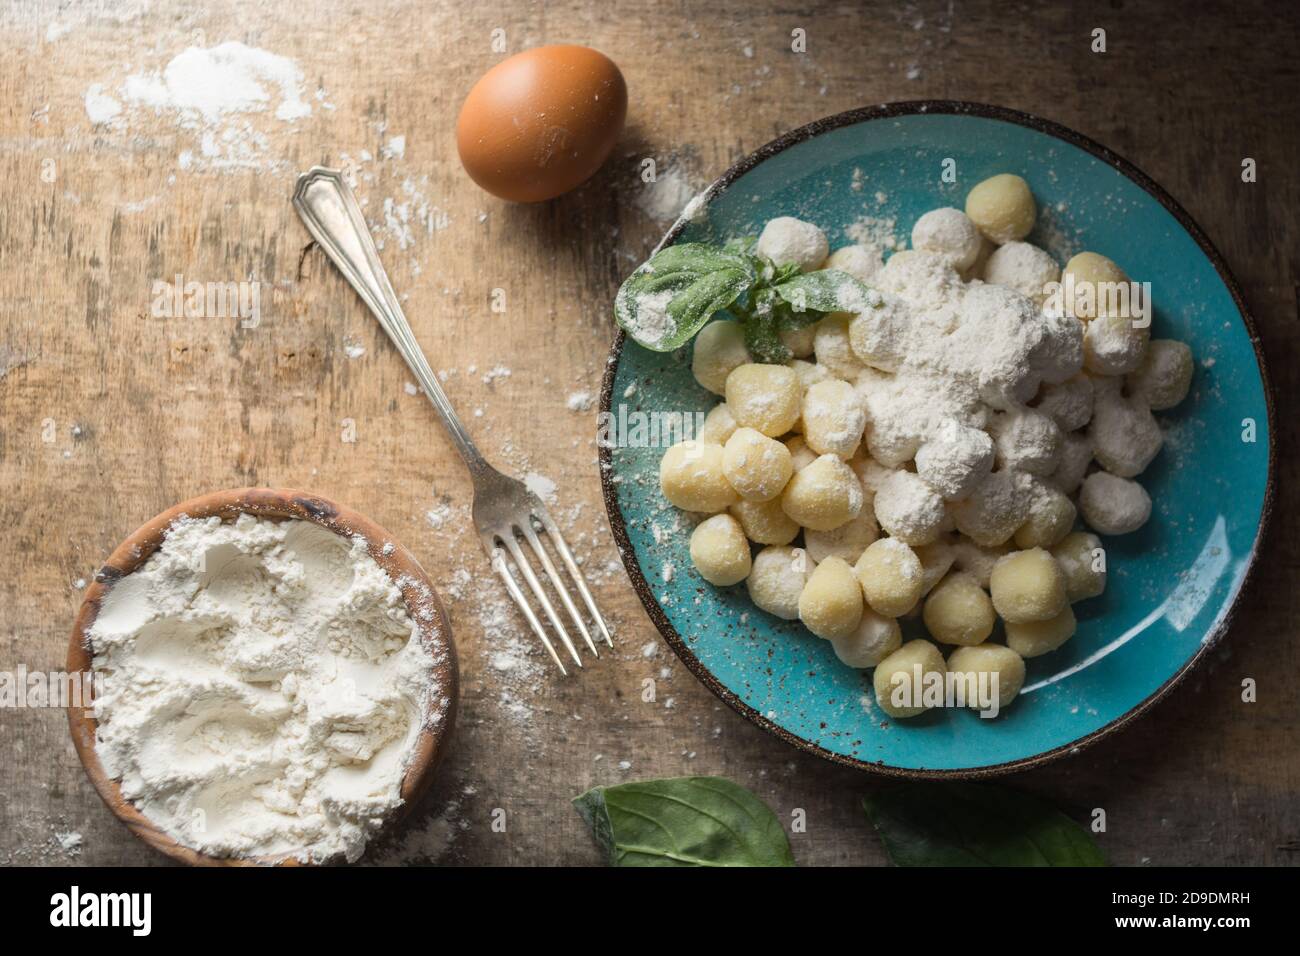 Raw gnocchi, typical Italian made of potato, flour and egg dish. Perfect meal to accompany with a sauce. Stock Photo